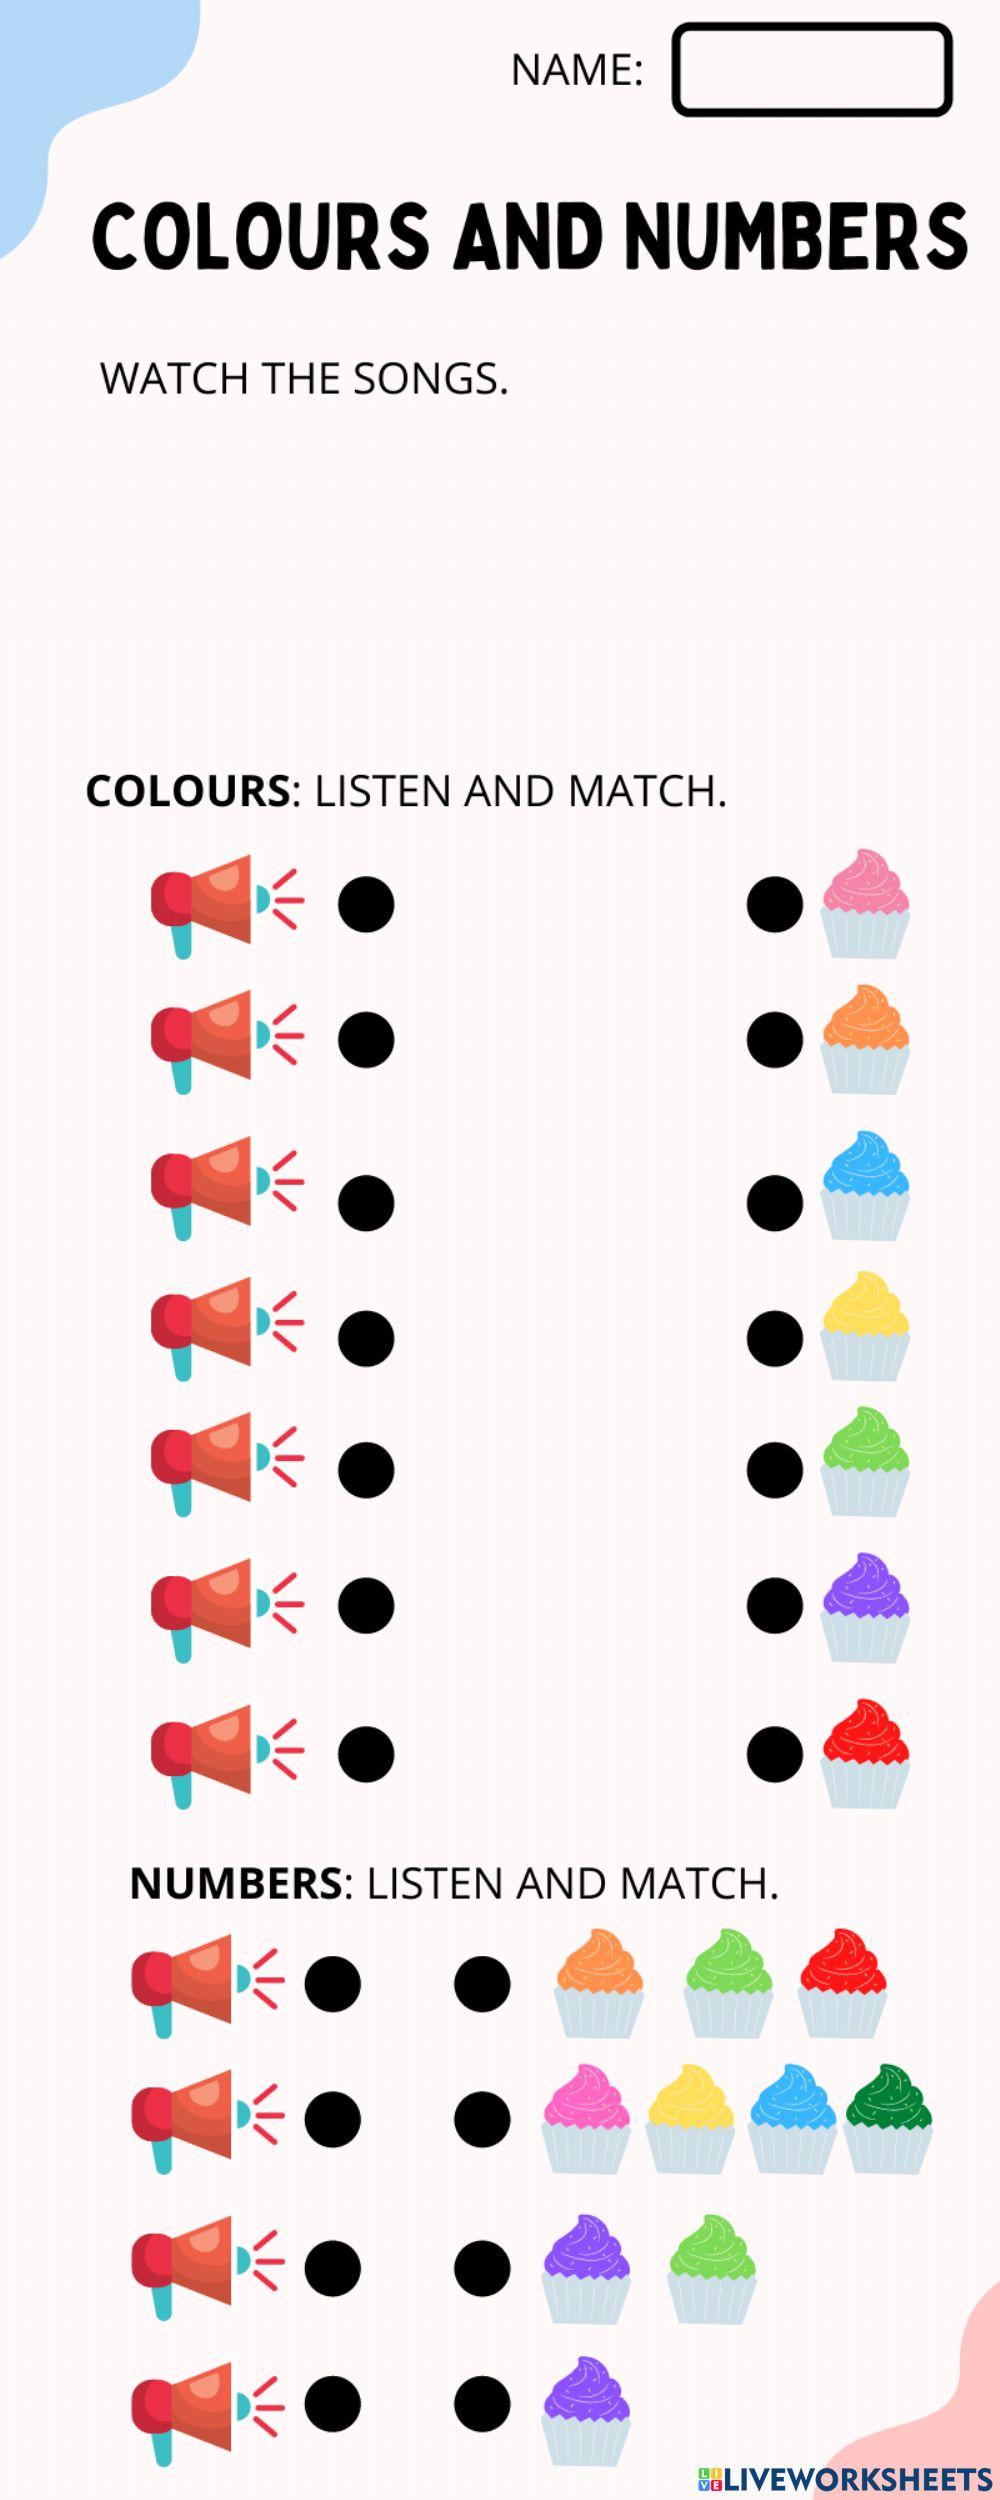 COLOURS AND NUMBERS